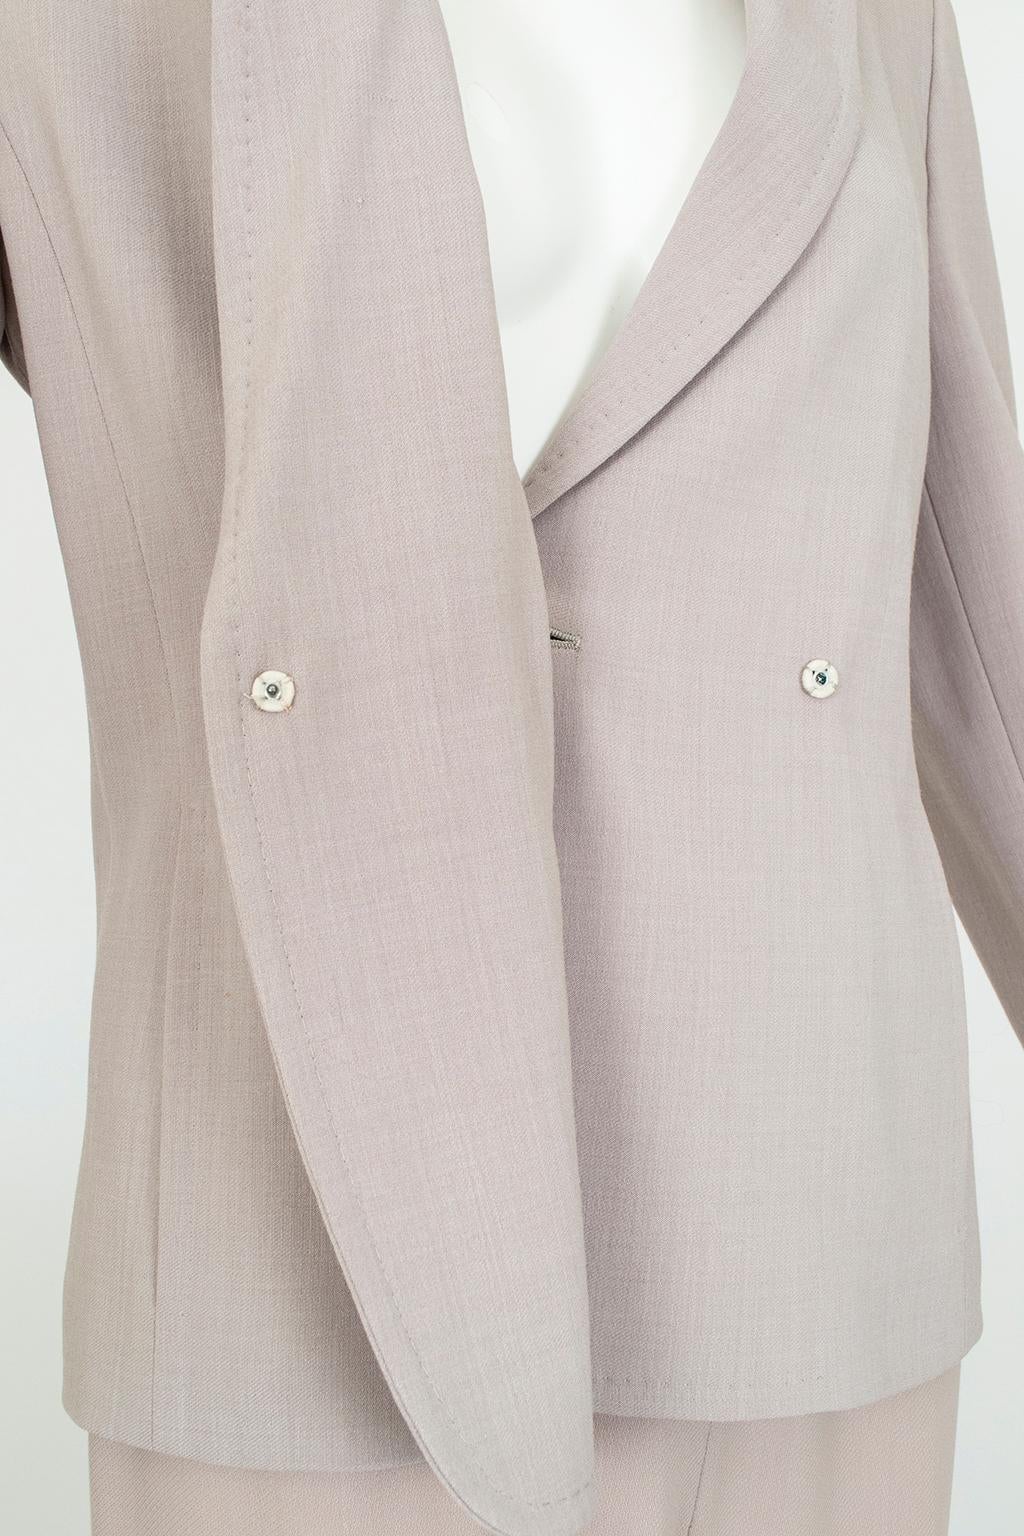 Max Mara Taupe Wool and Silk Crêpe Belted Pant Suit - It 40 – 42, 1990s For Sale 6